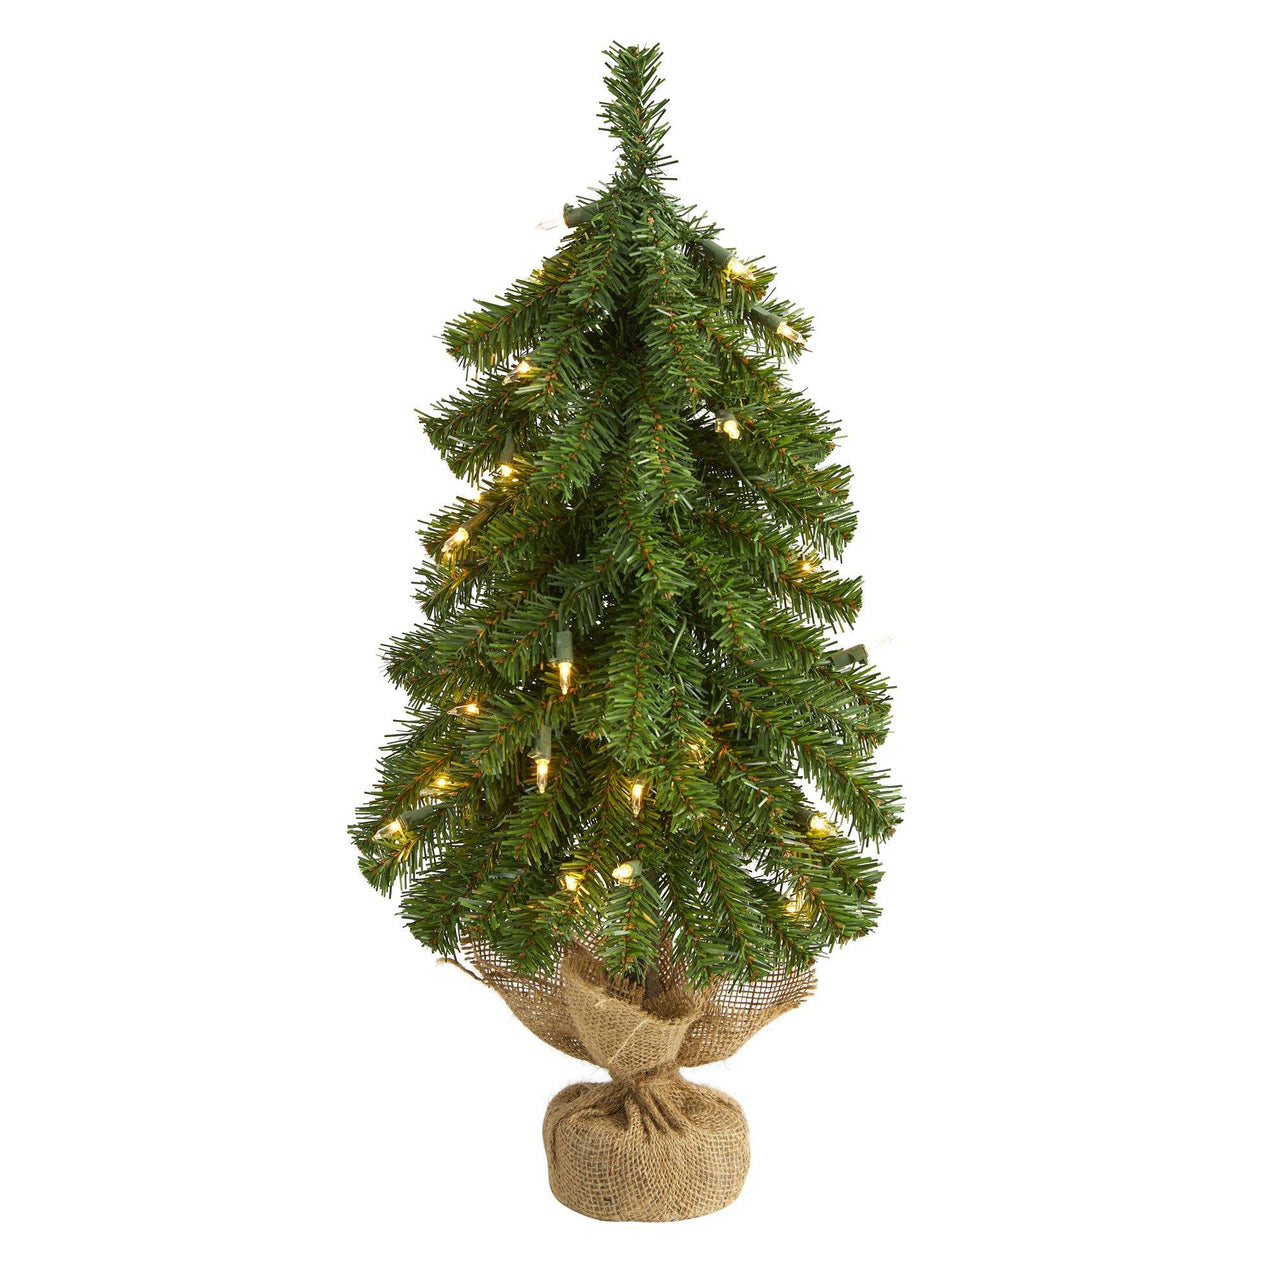 2’ Alpine Artificial Christmas Tree with 35 Lights, 92 Bendable Branches and a Burlap Planter